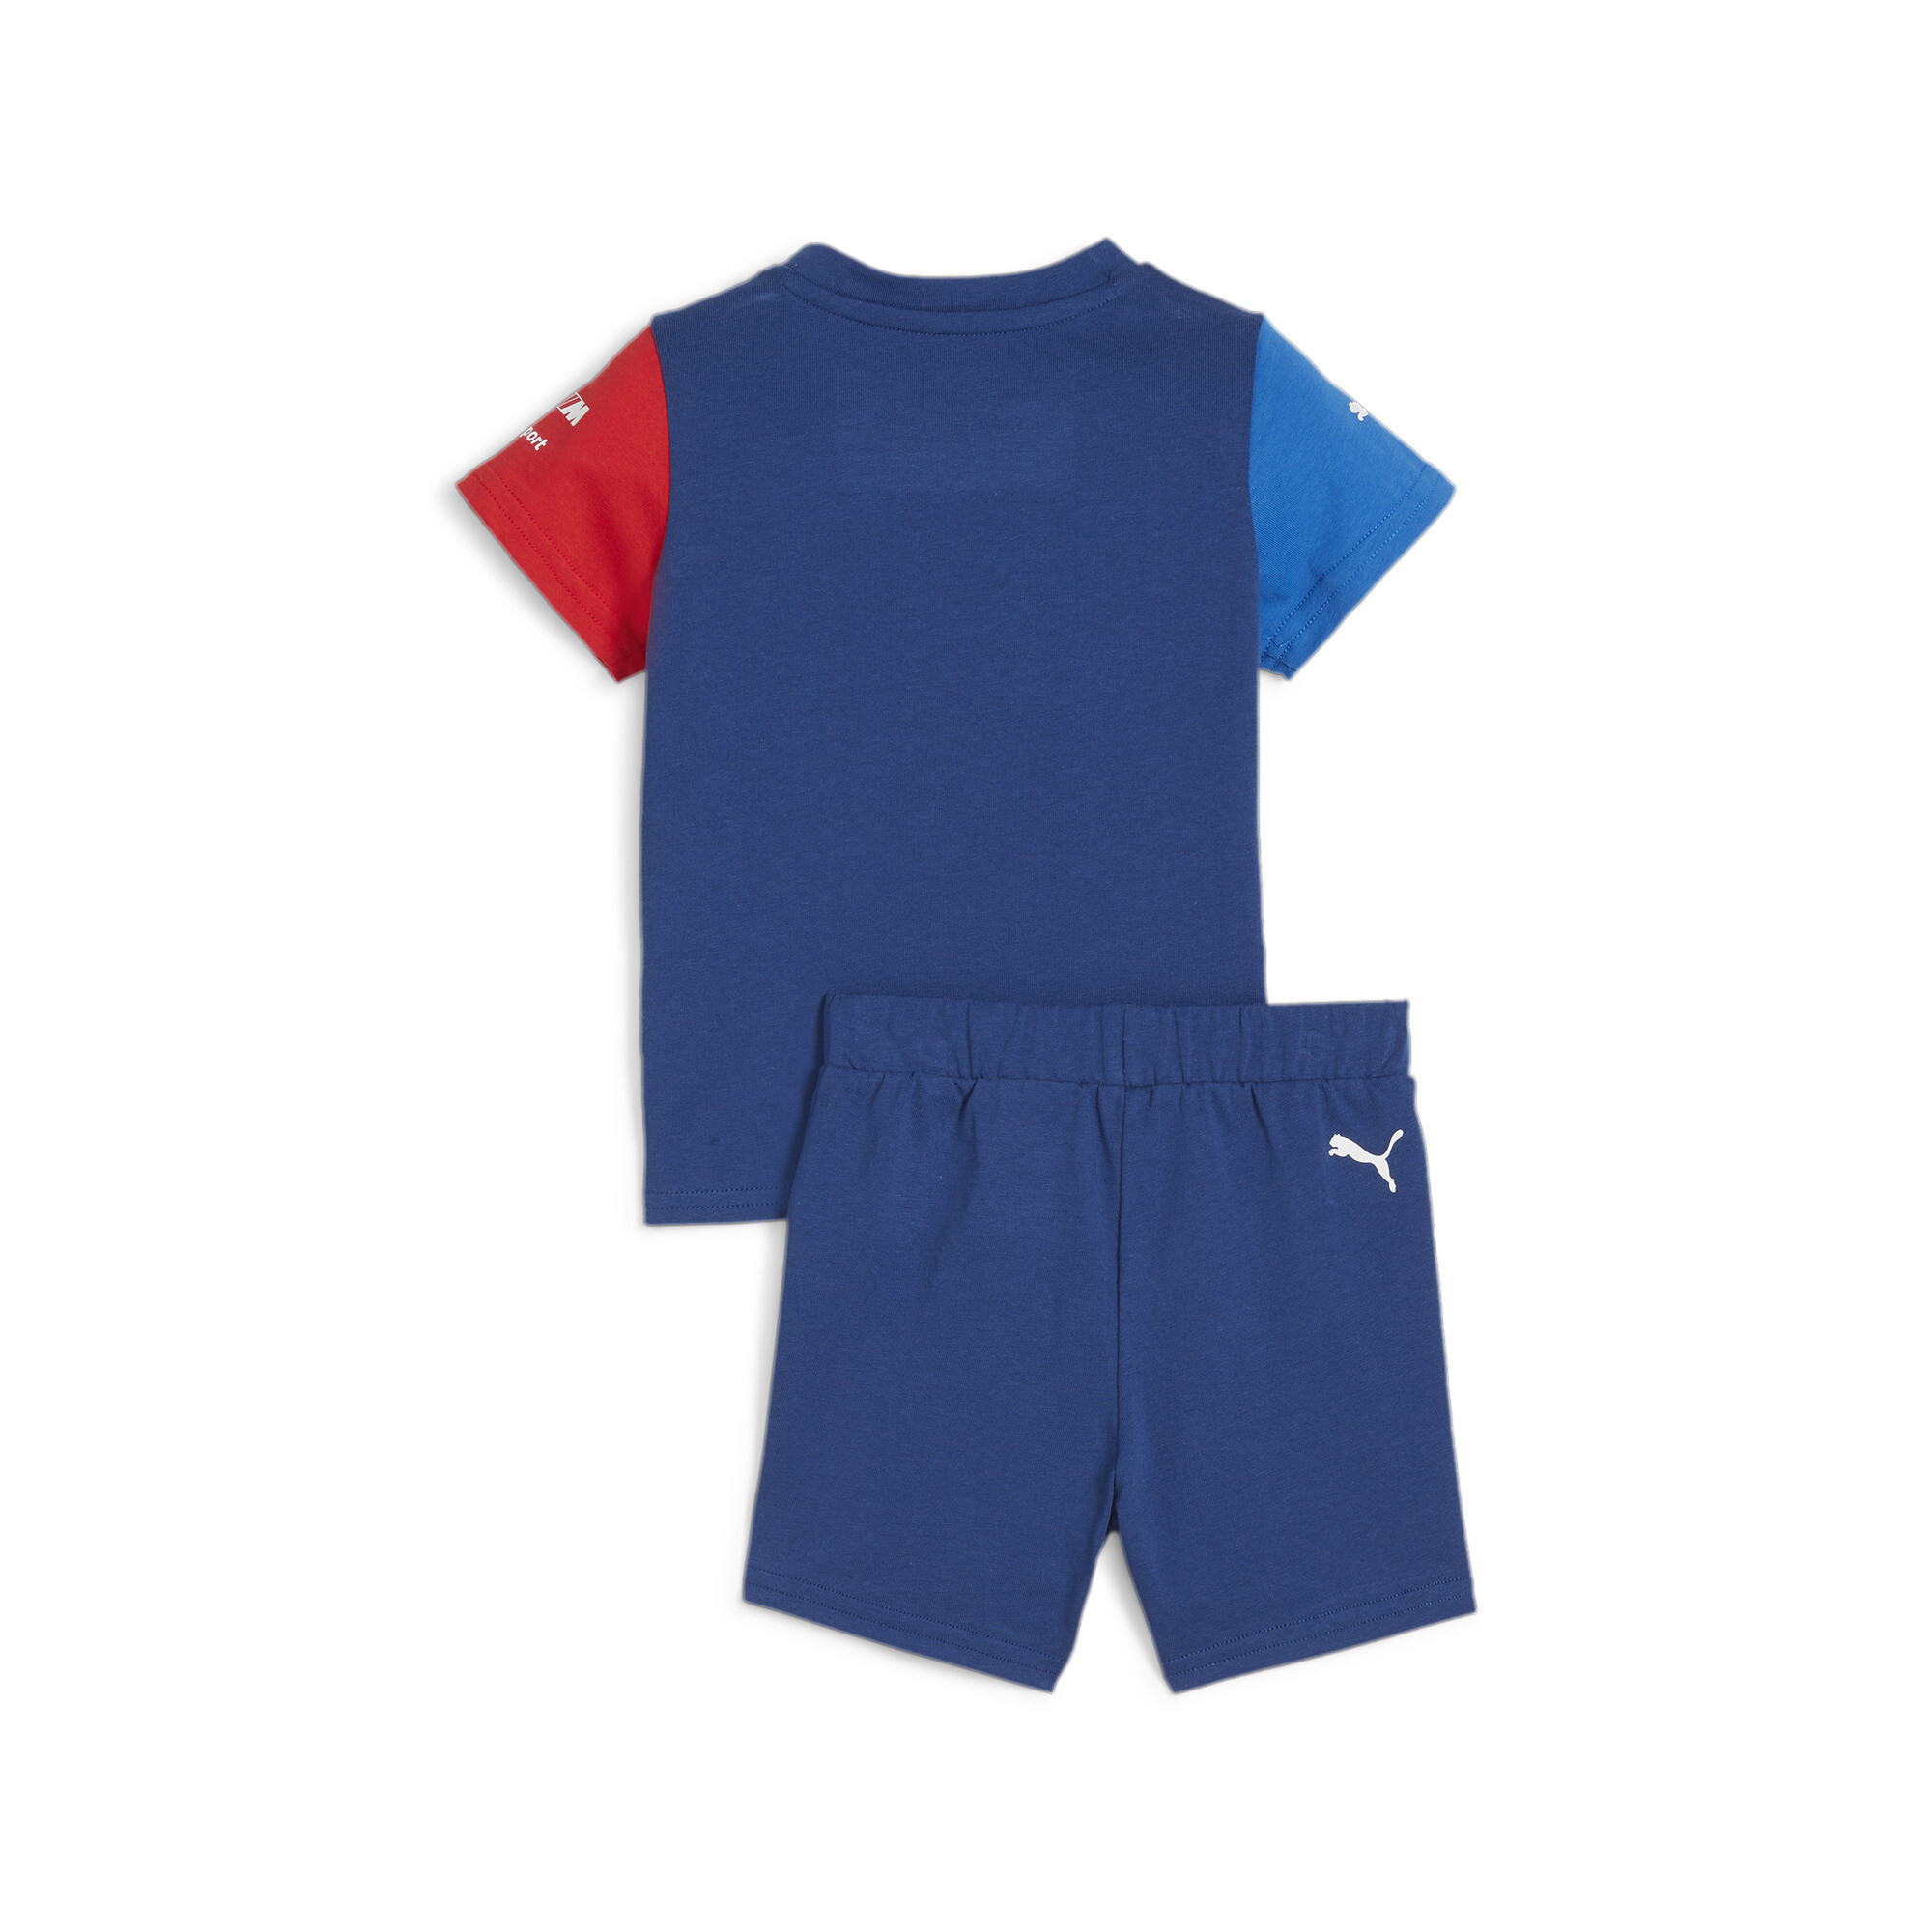 PUMA BMW M Motorsport Toddlers' Set In Blue, Size 3-4 Youth